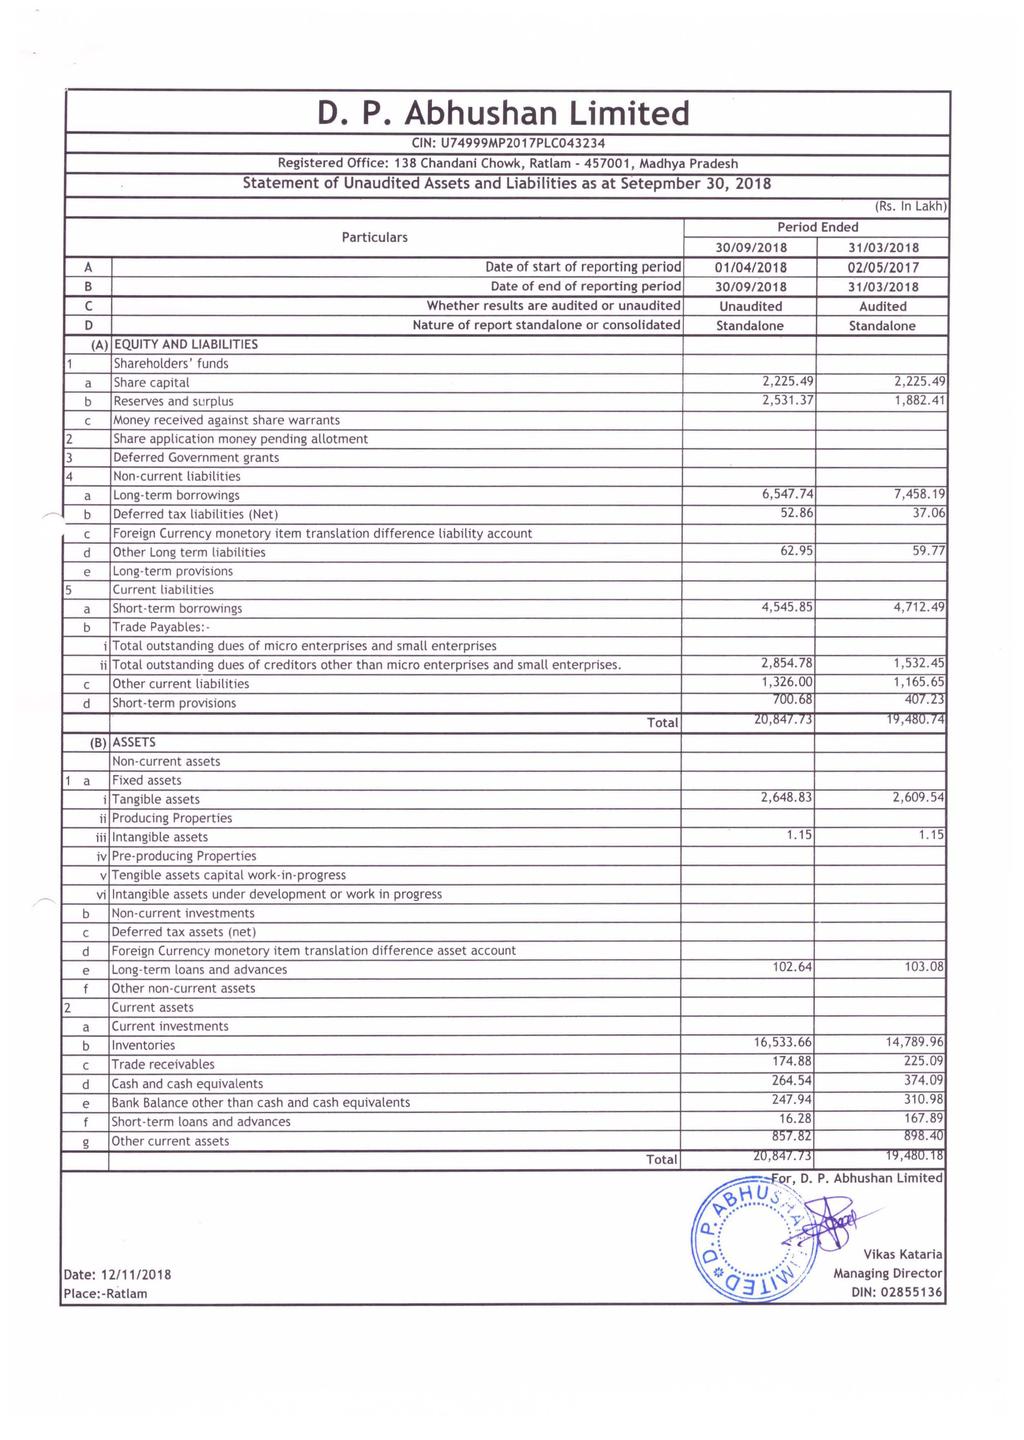 D. P. Abhushan Limited CIN: U74999MP20 17PlC043234 Registered Office: 138 Chandani Chowk, Ratlam - 457001, Madhya Pradesh Statement of Unaudited Assets and Liabilities as at Setepmber 30, 2018